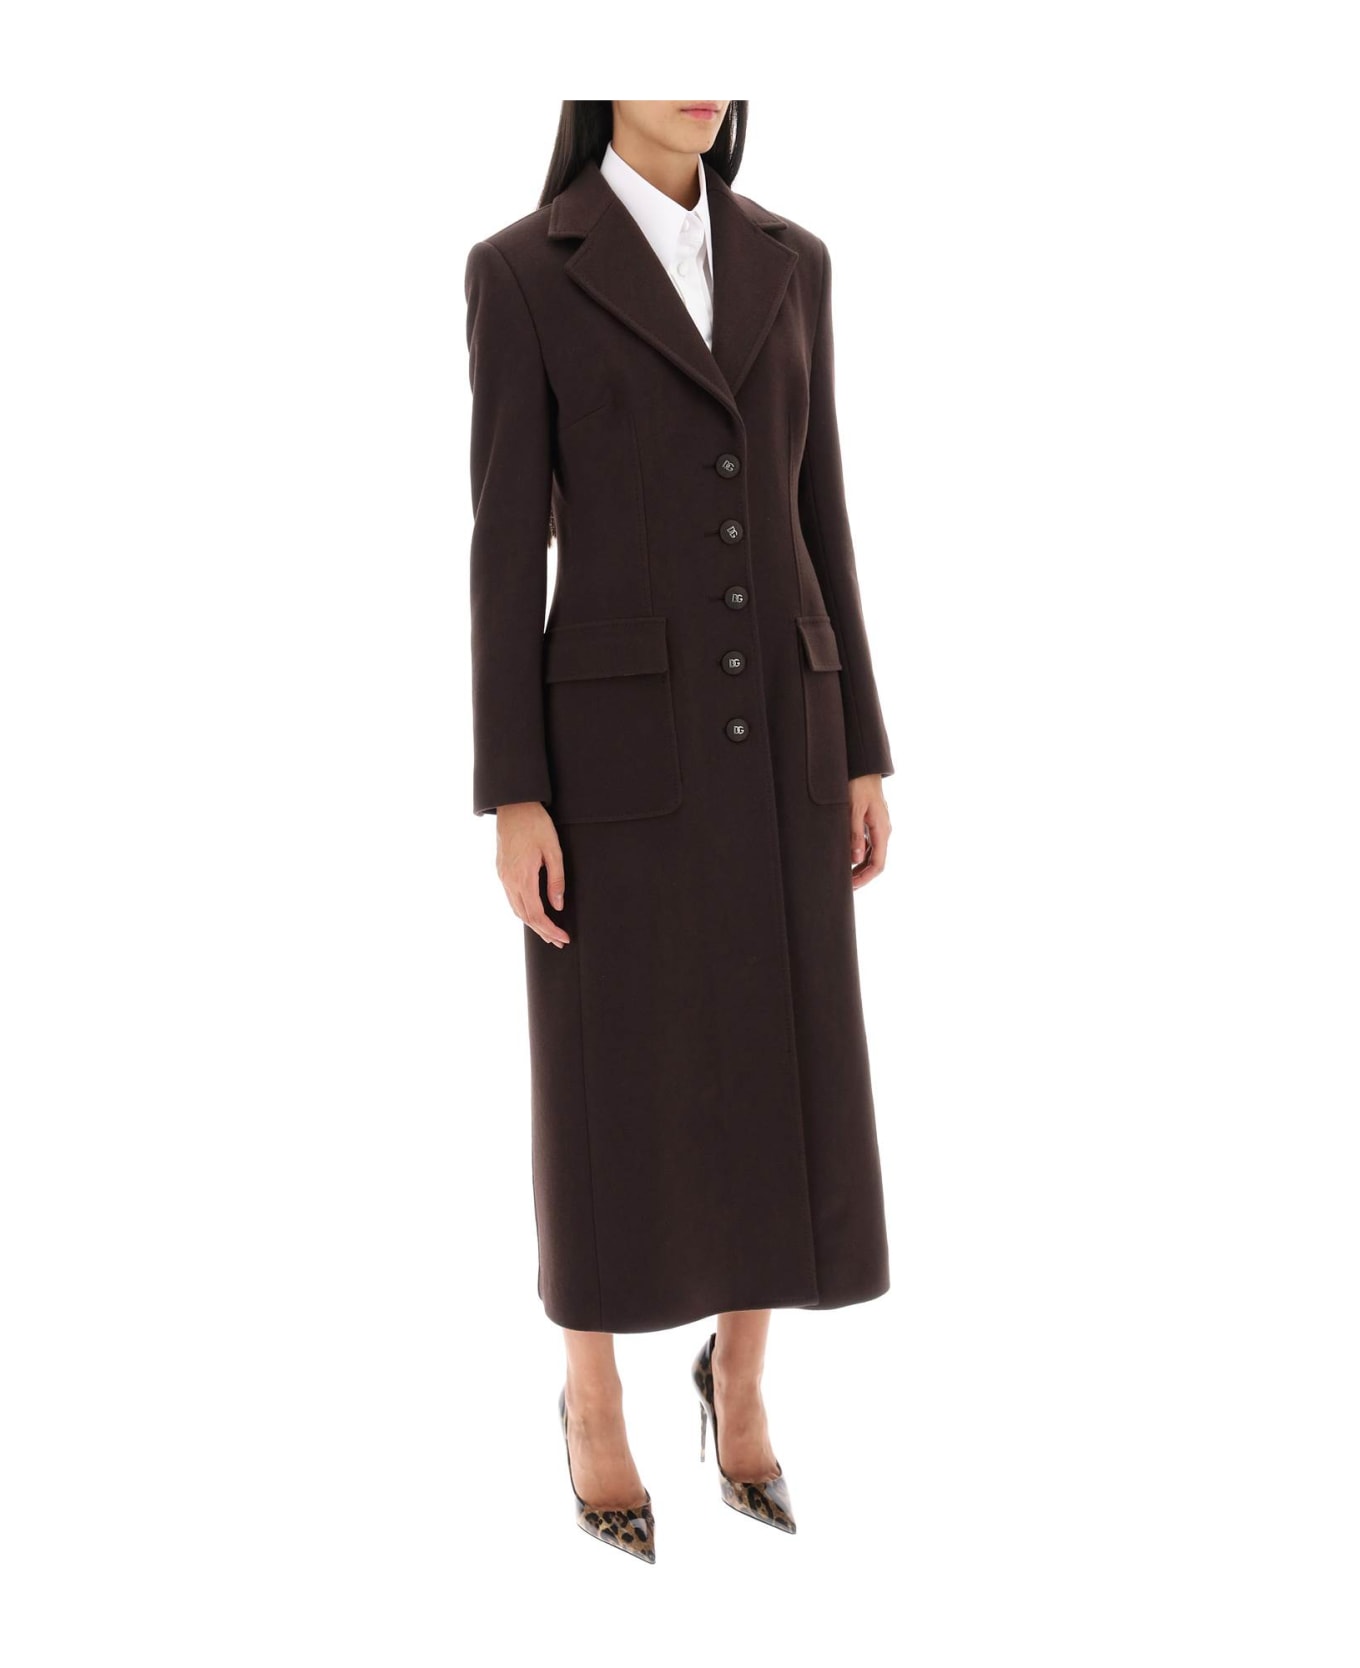 Dolce & Gabbana Shaped Coat In Wool And Cashmere - Marrone Scuro 4 コート